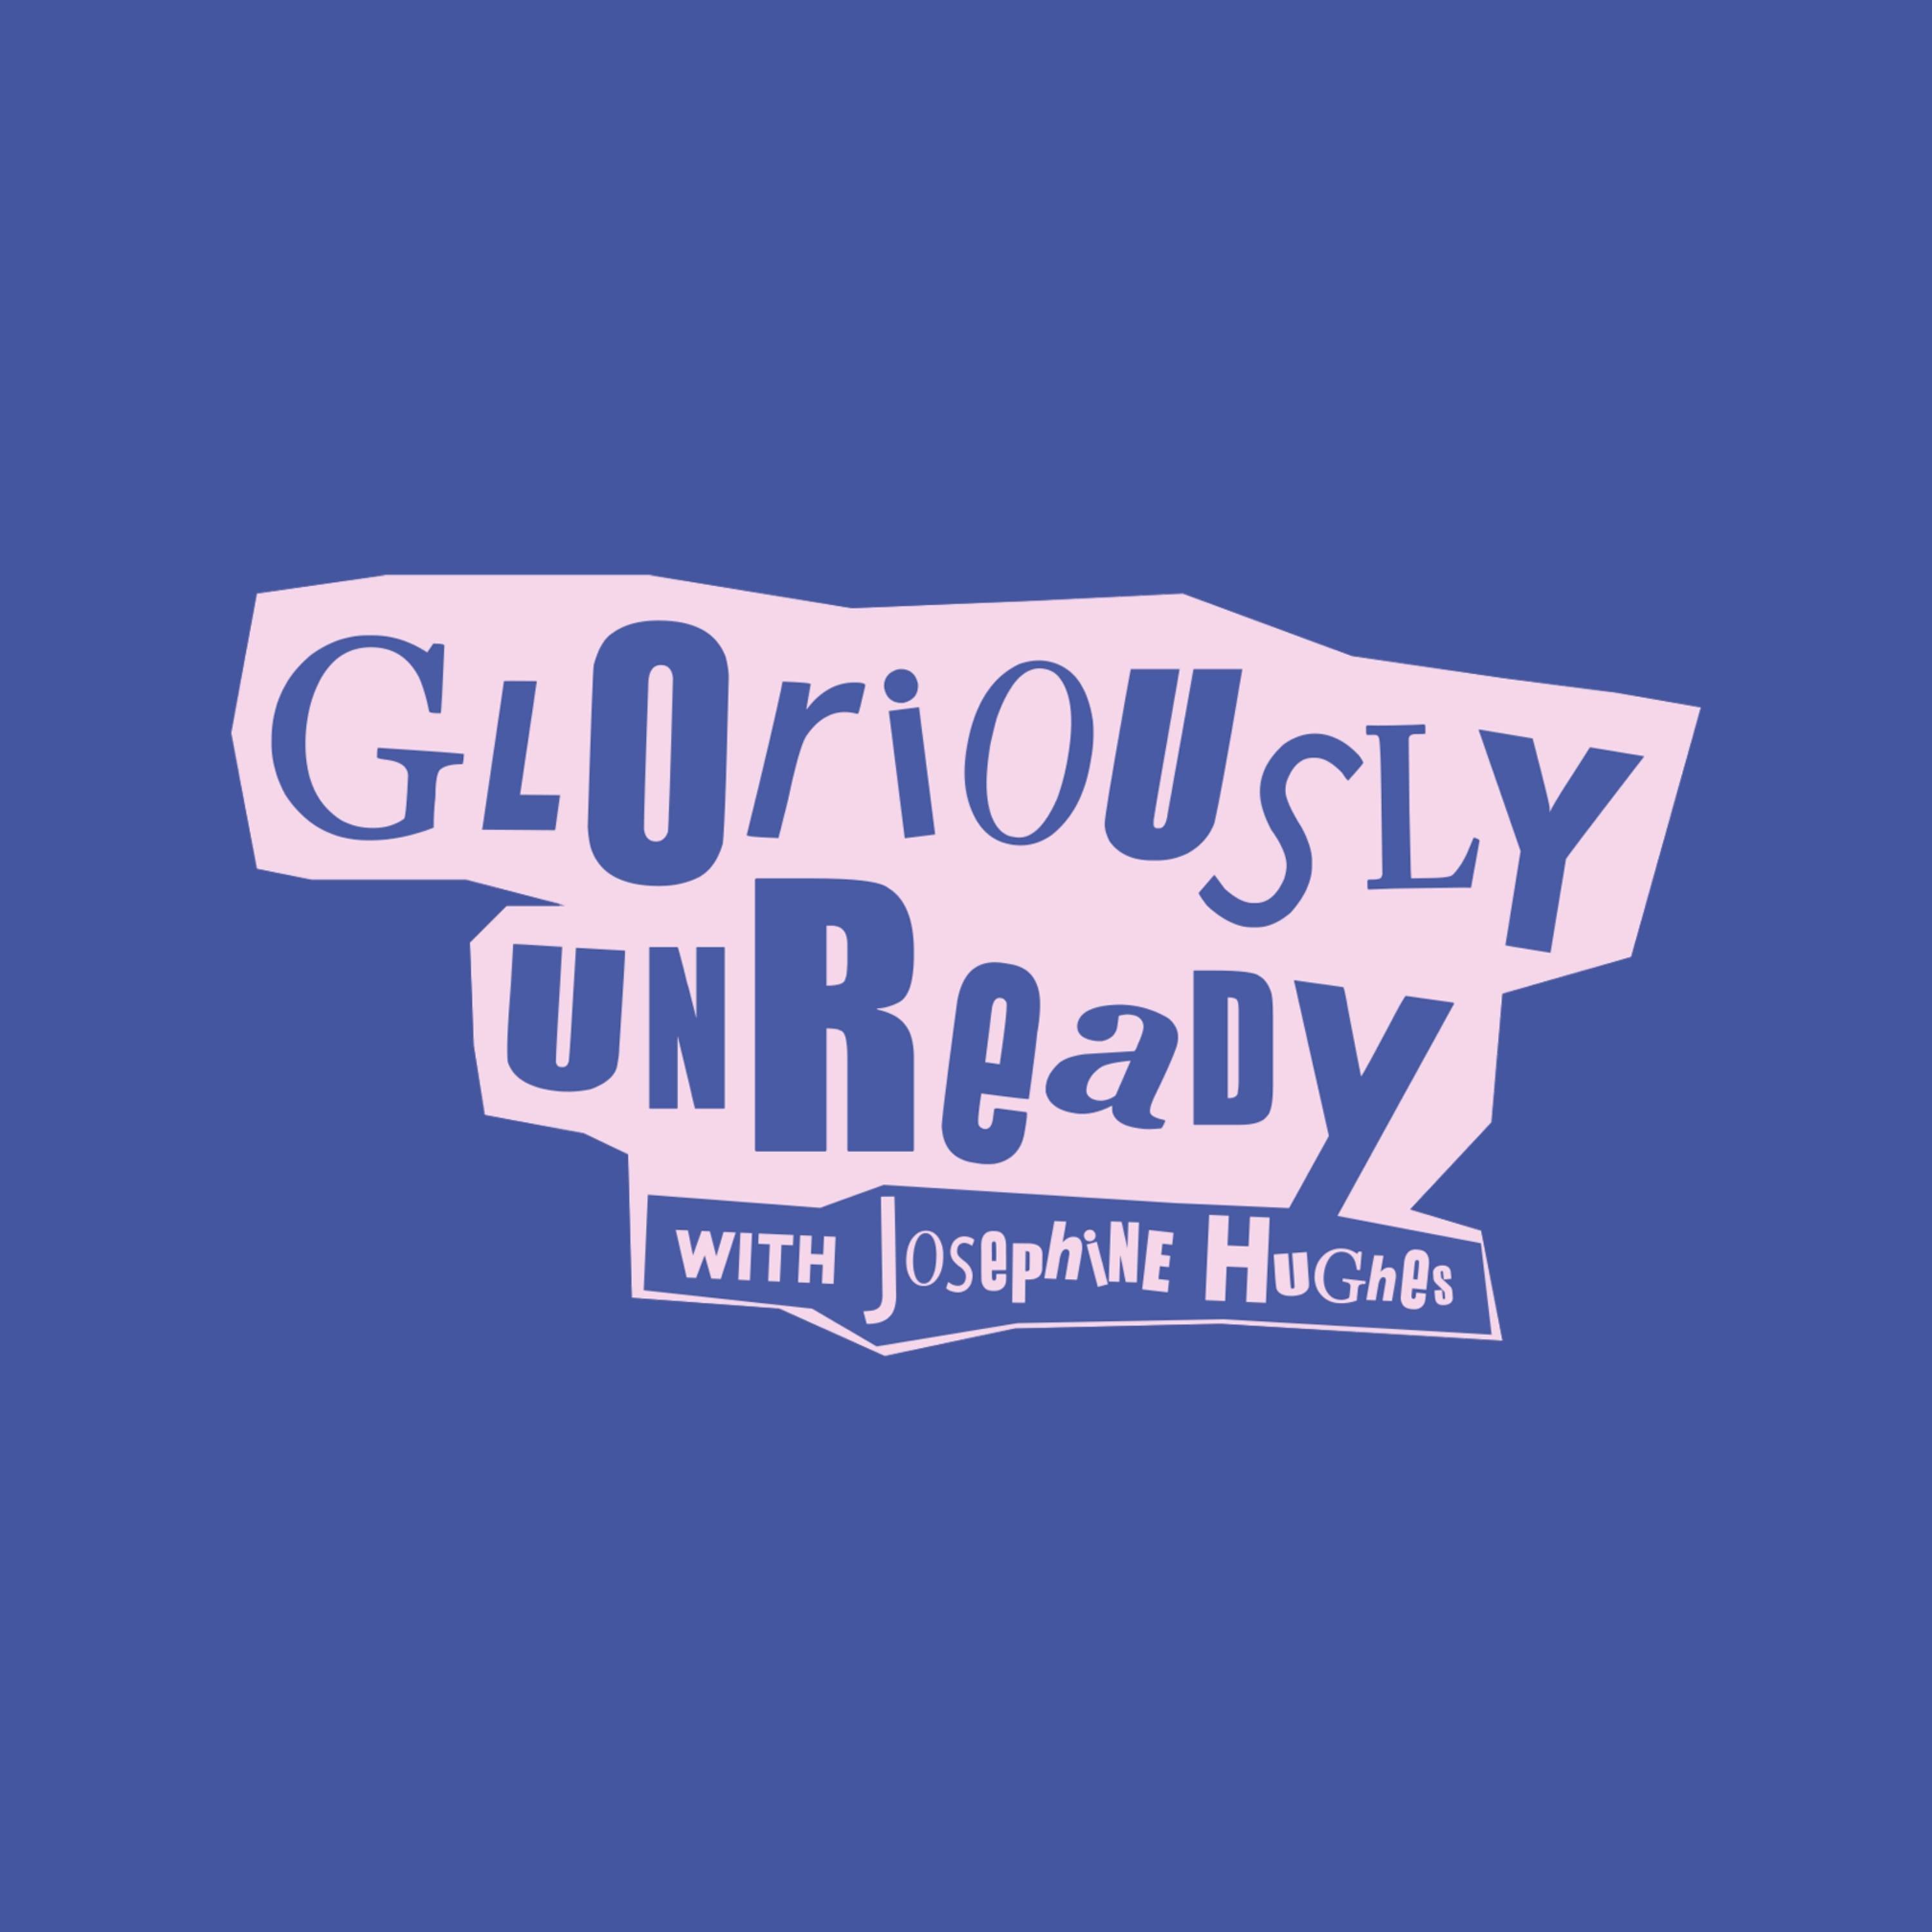 Artwork for podcast Gloriously Unready